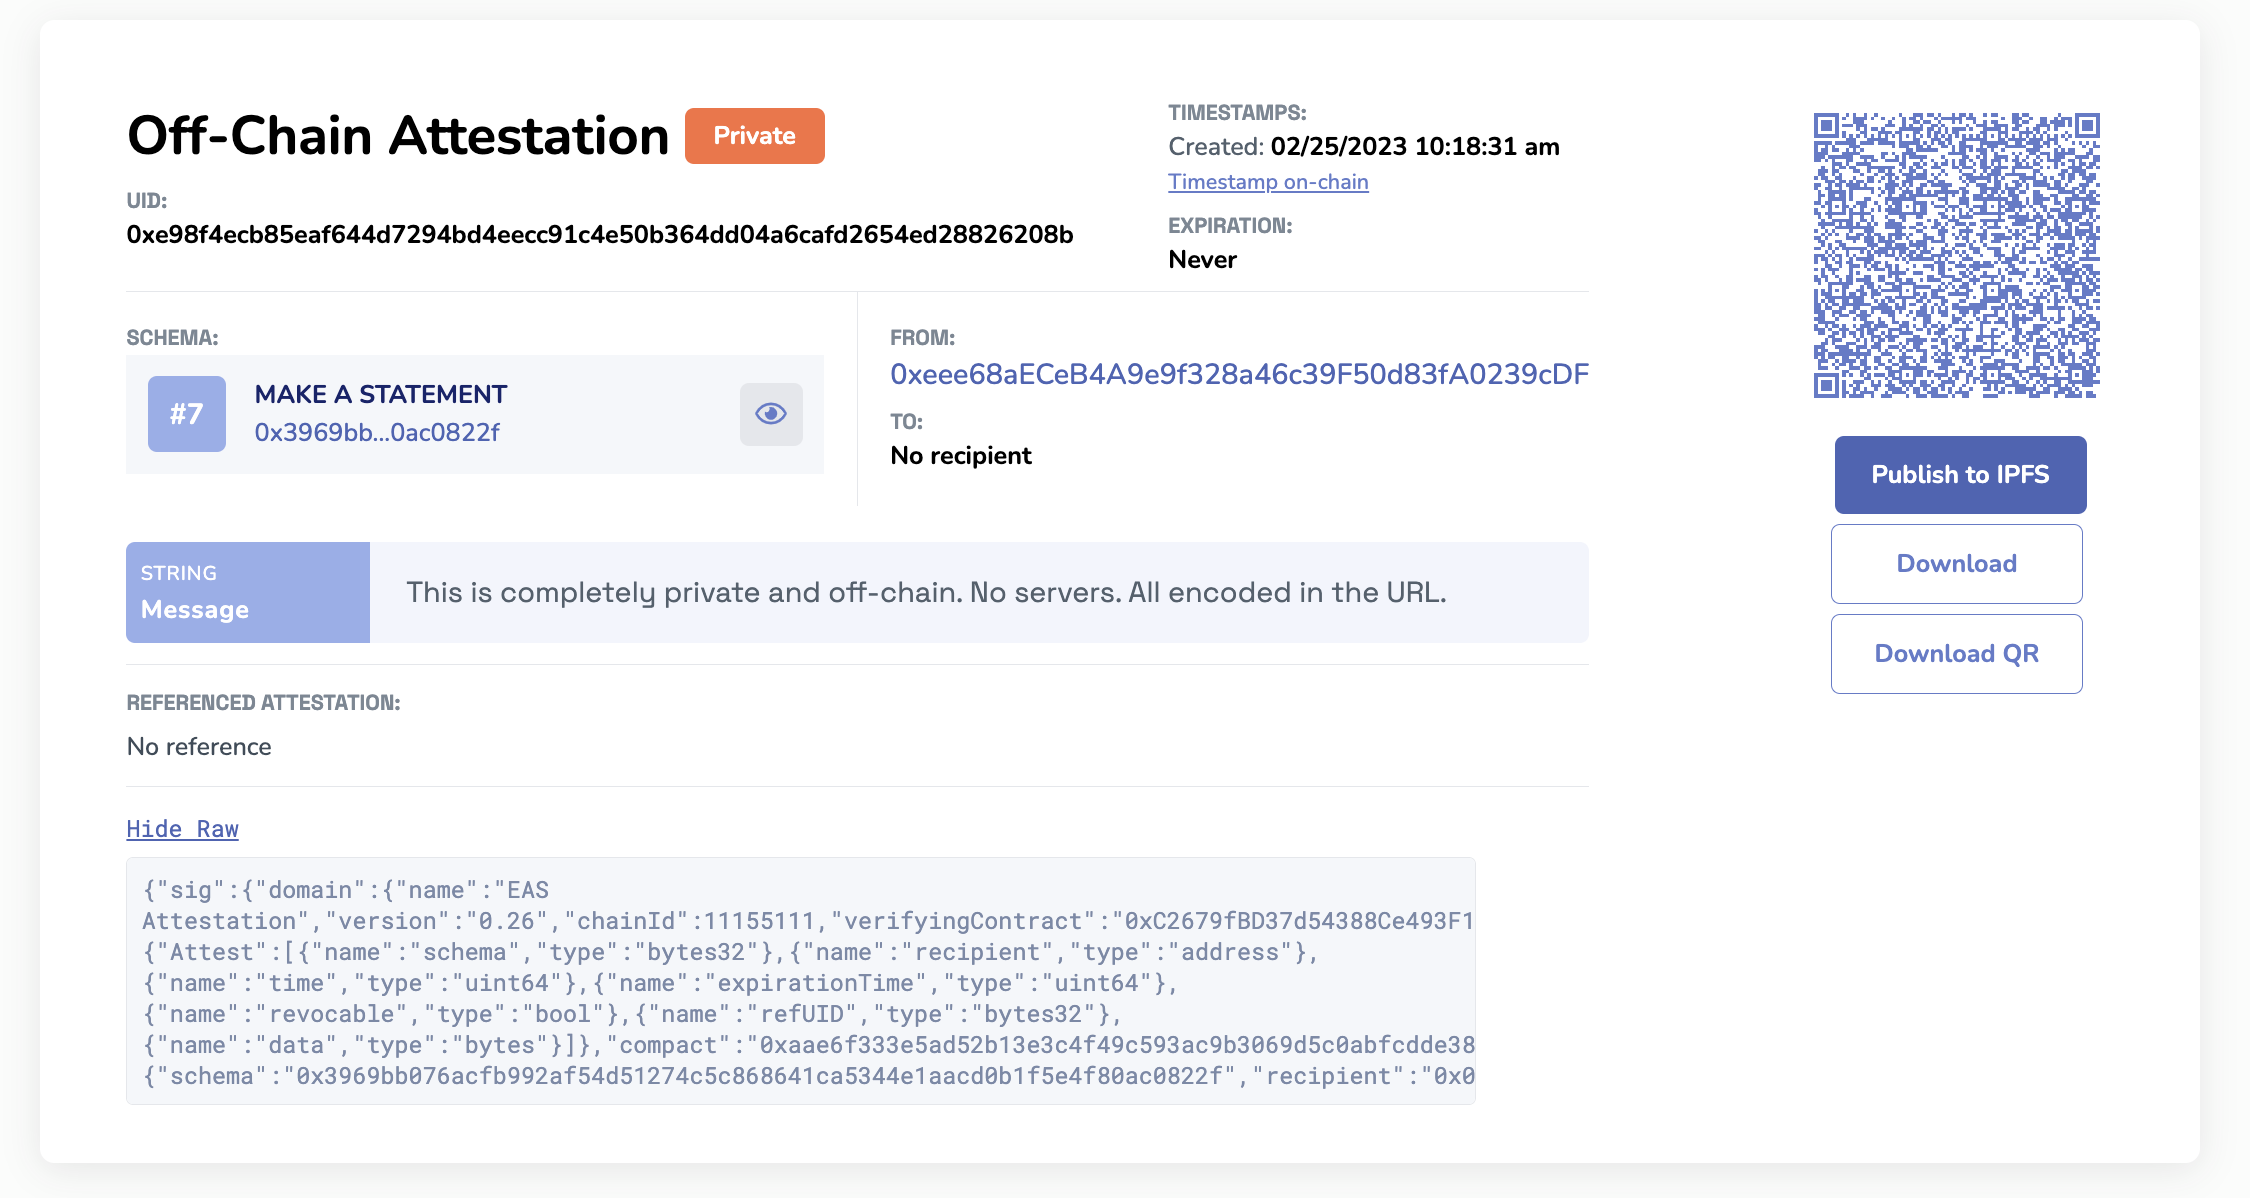 Sample private off-chain attestation made on Ethereum Attestation Service.